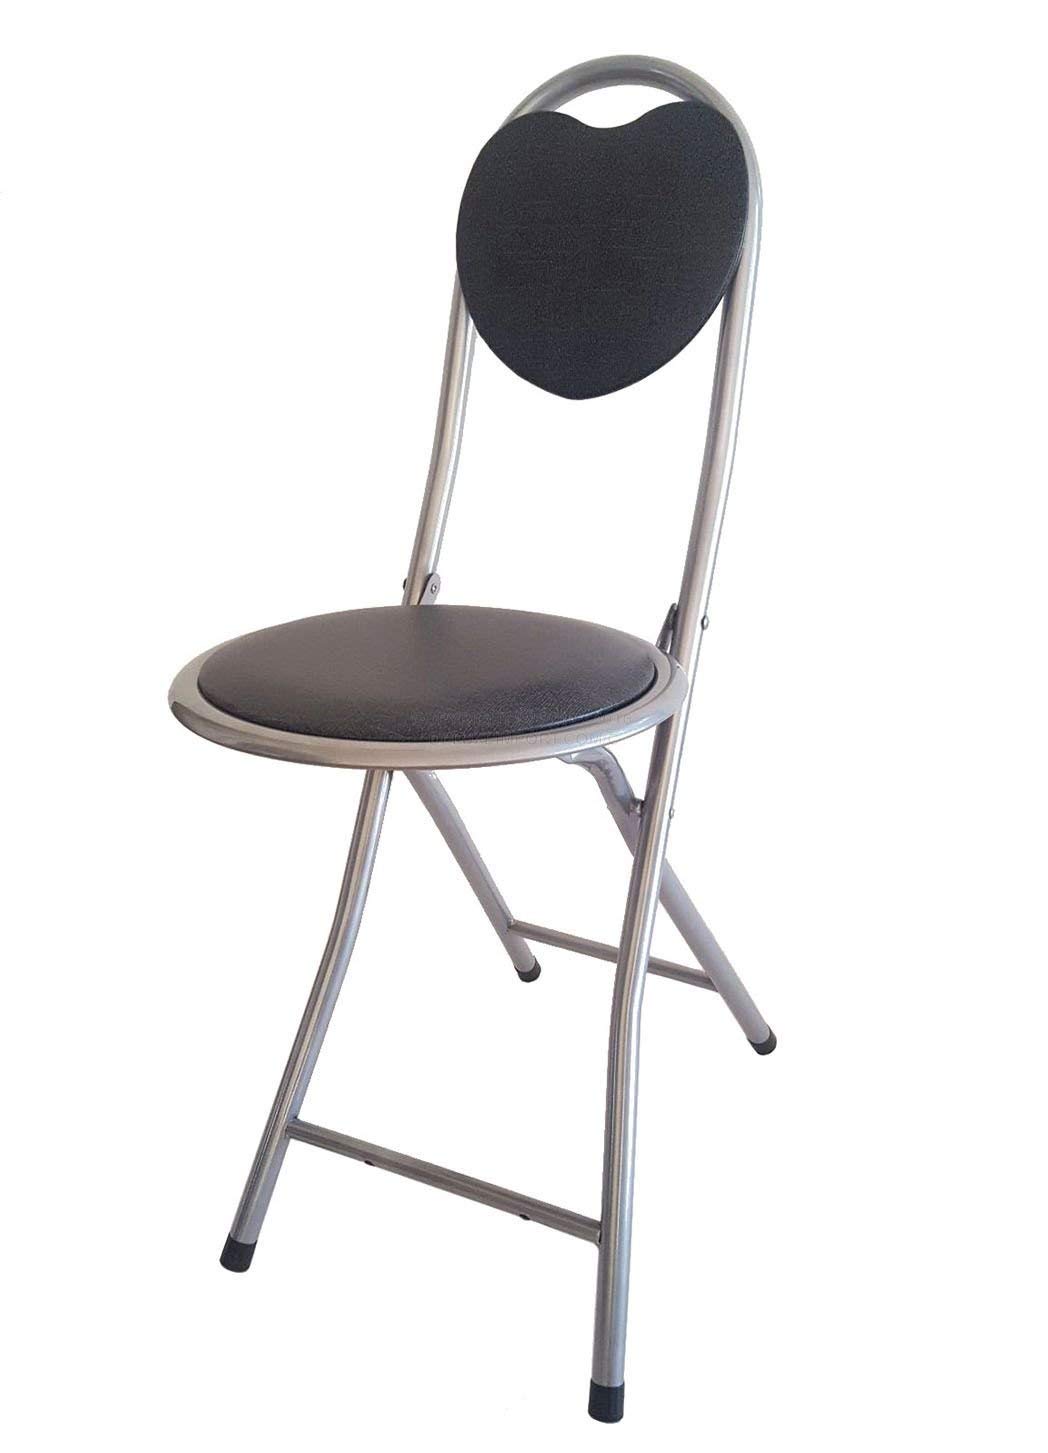 Folding chairs amazon.com: dlux small folding chair extra padded padded seat for comfort: HQIQEBL